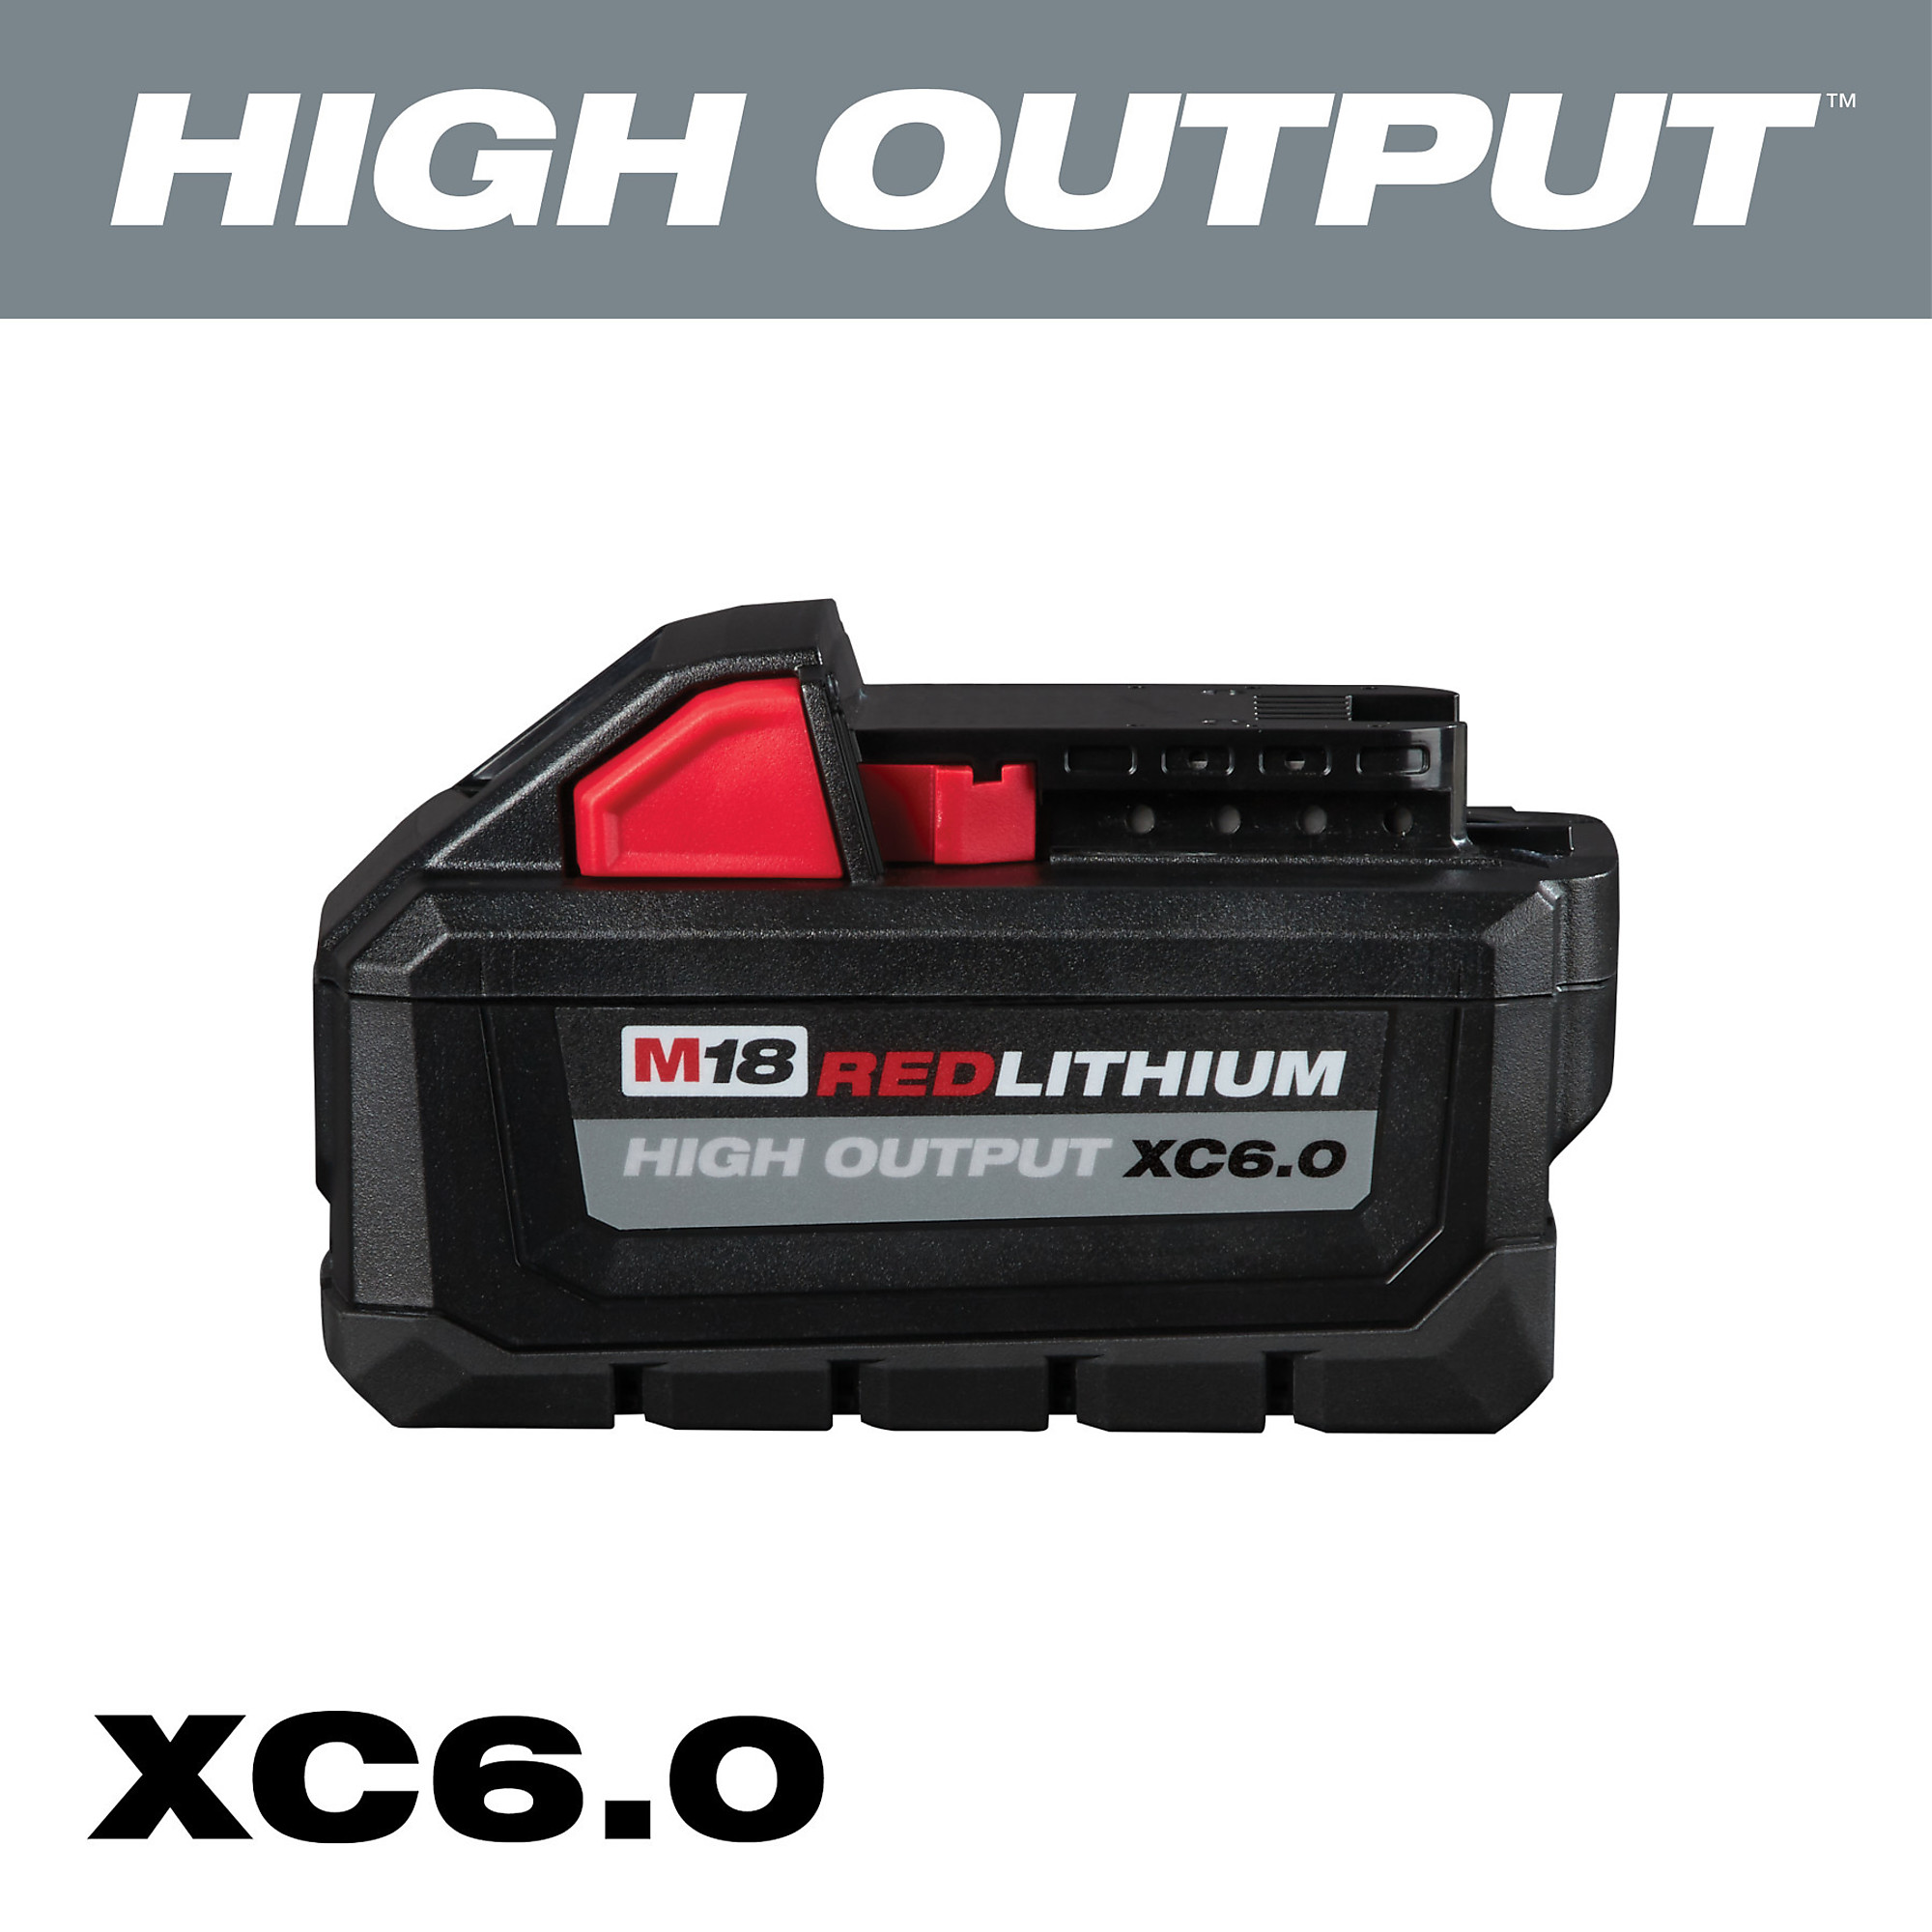 Milwaukee M18 REDLITHIUM High Output XC6.0 Battery Pack, 6.0Ah